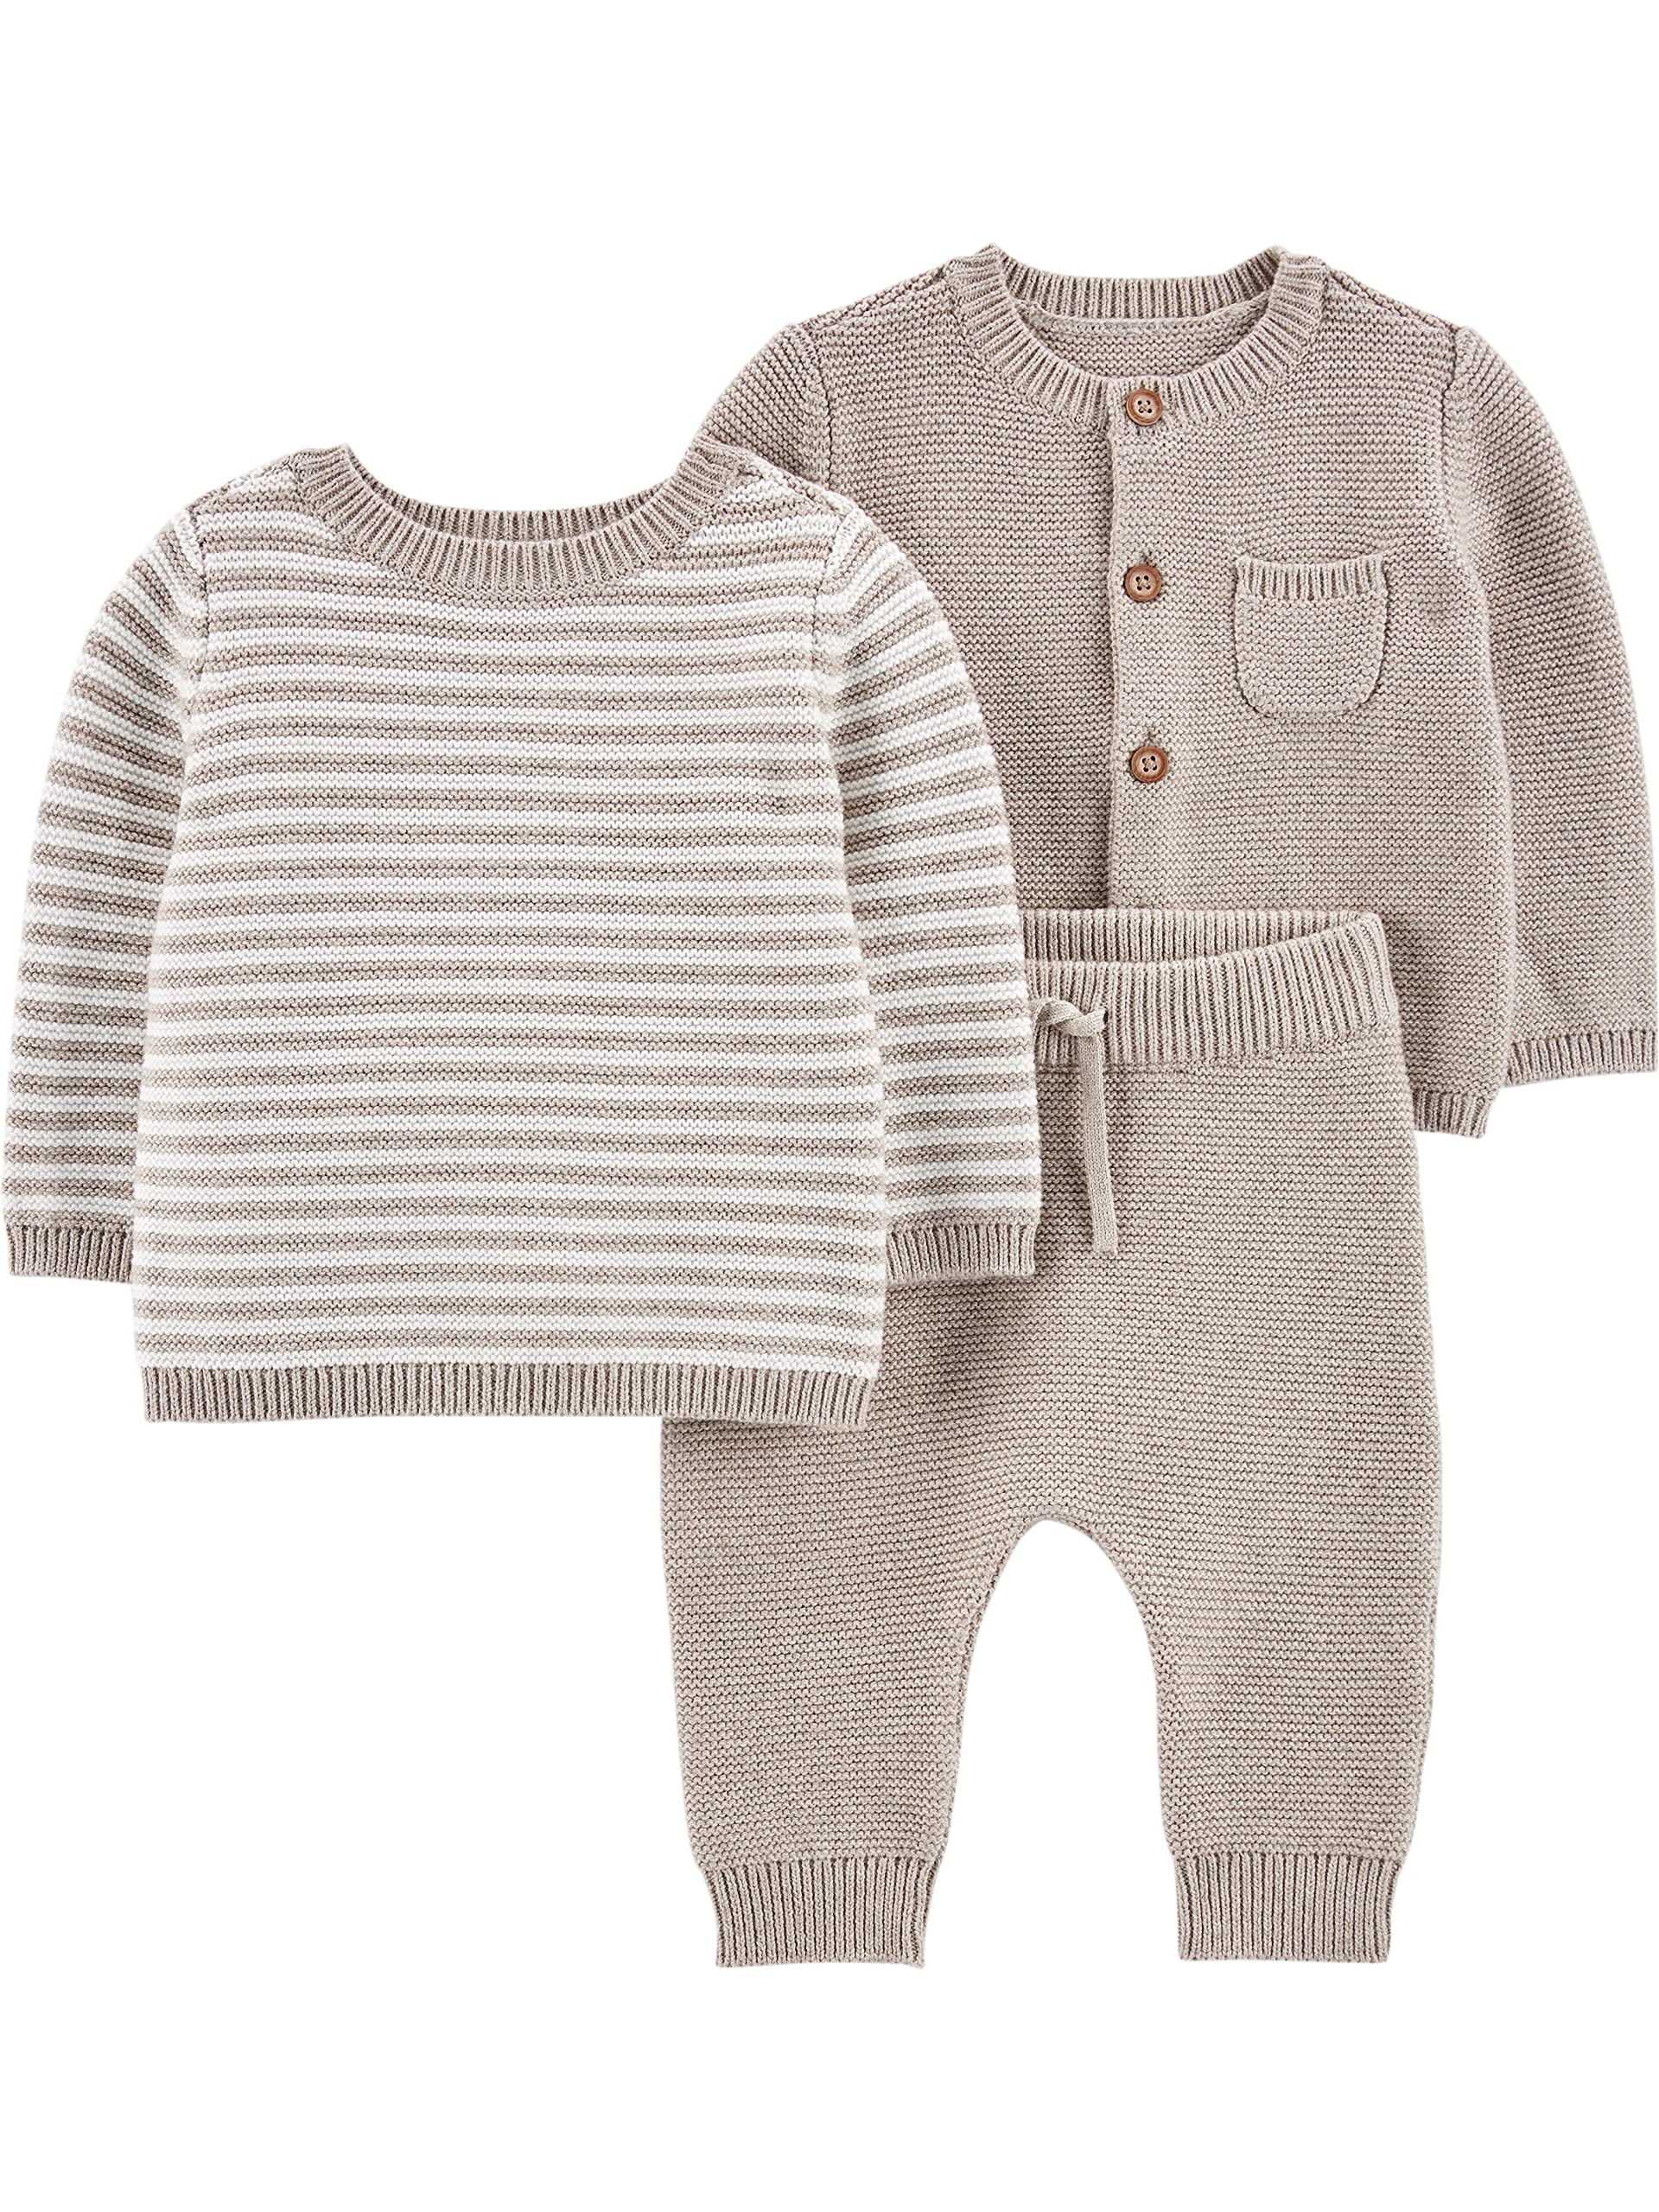 Simple Joys by Carter's Baby Girls' 3-Piece Sweater Set